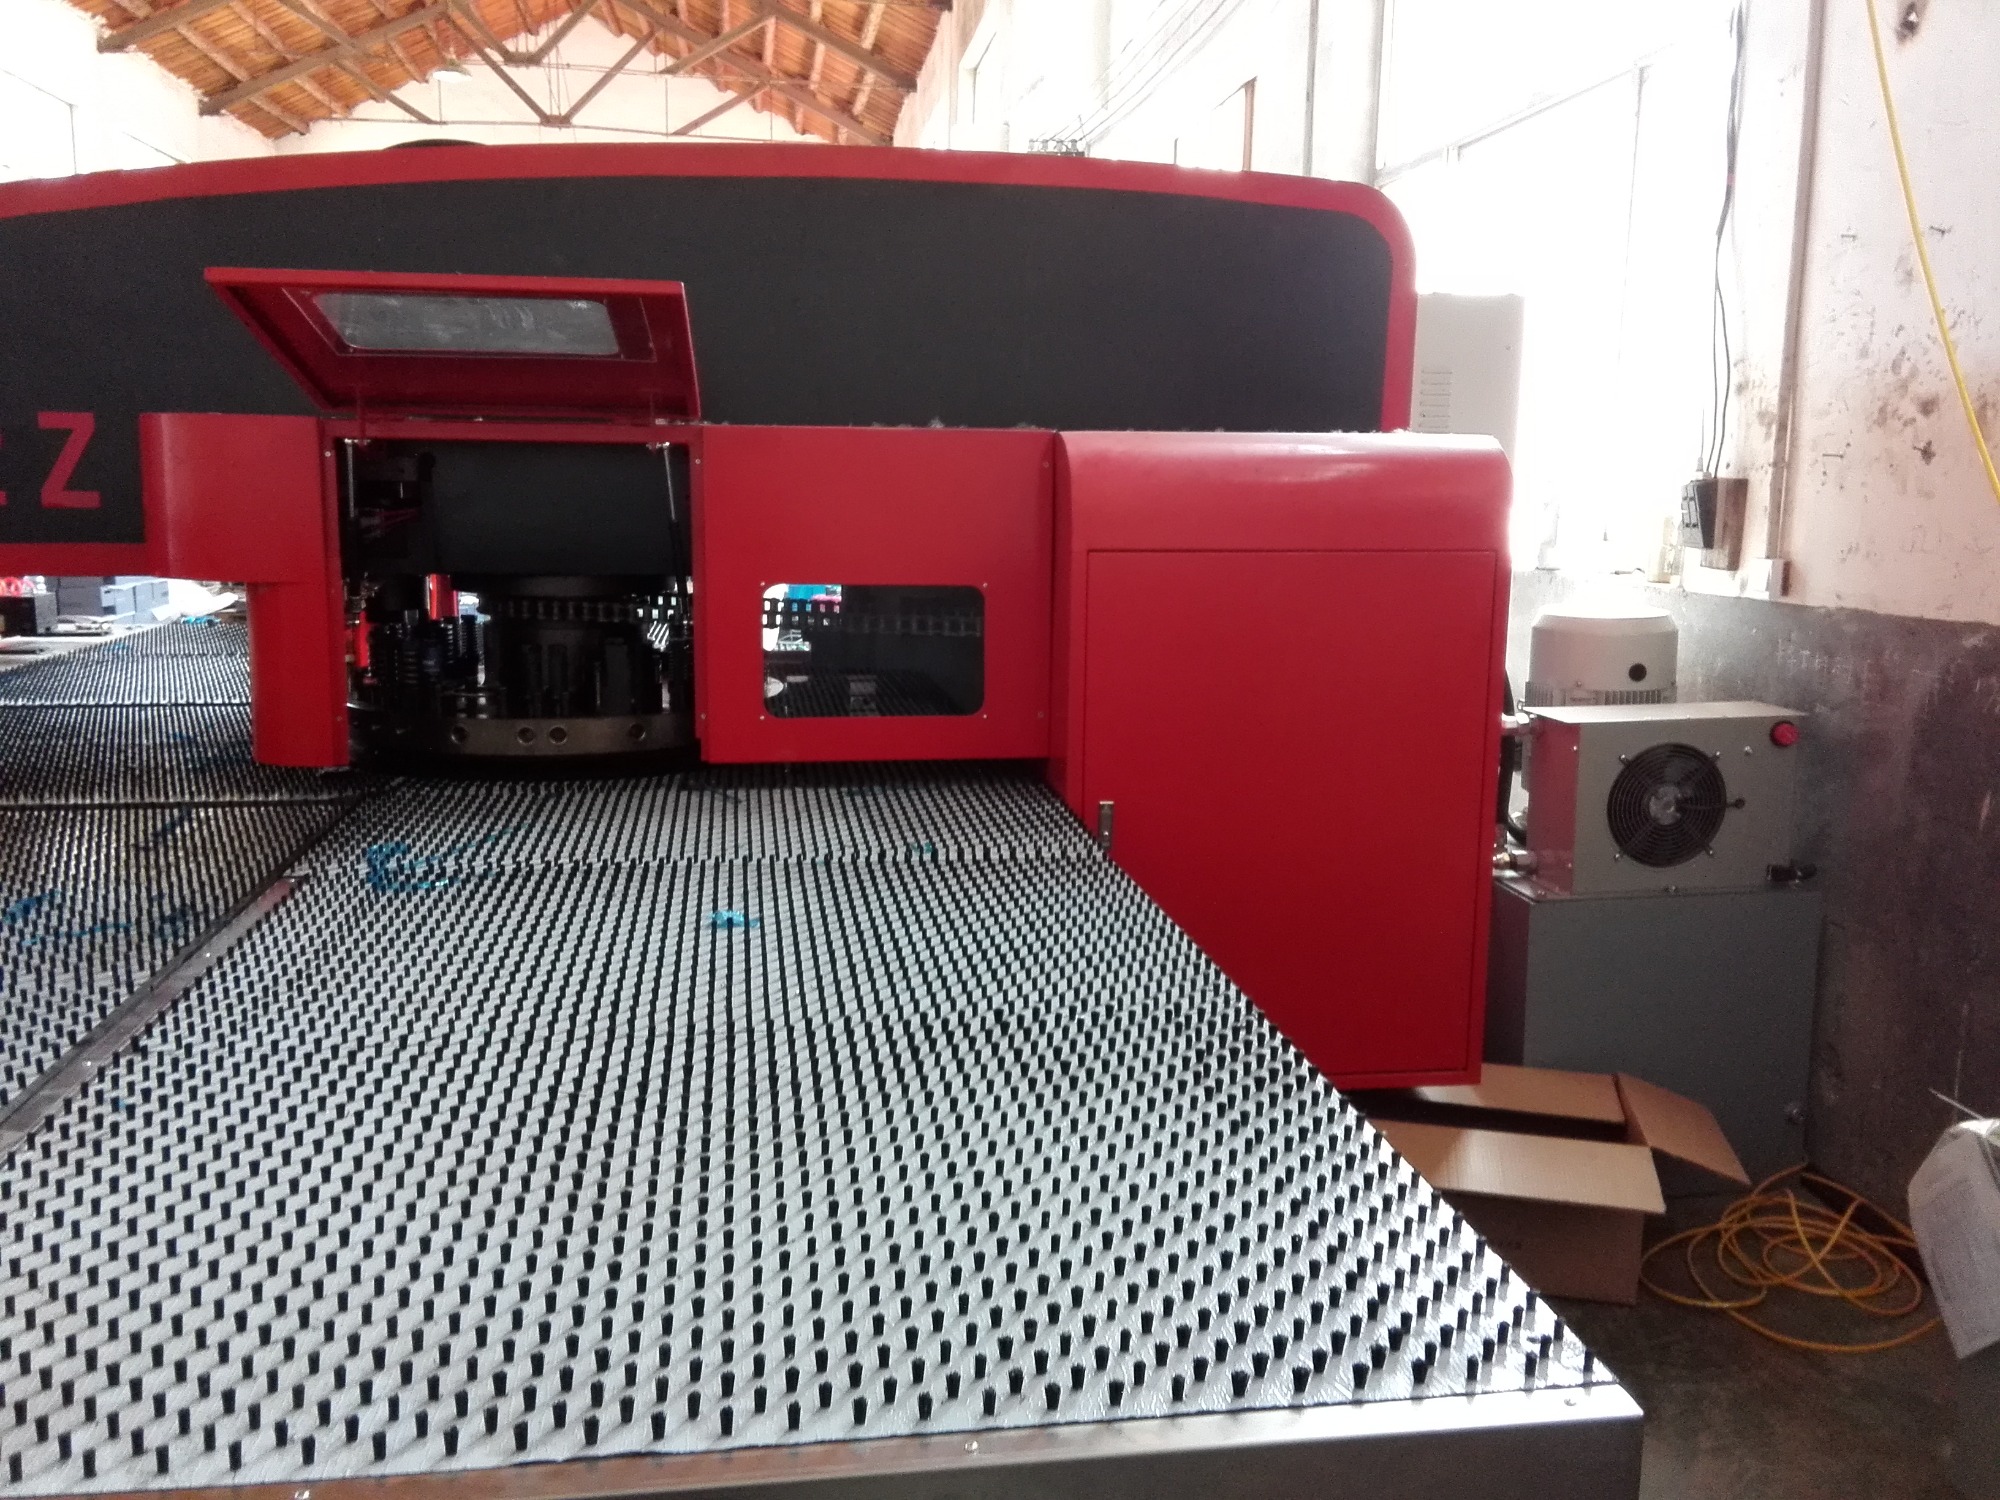 CNC punch press feed system